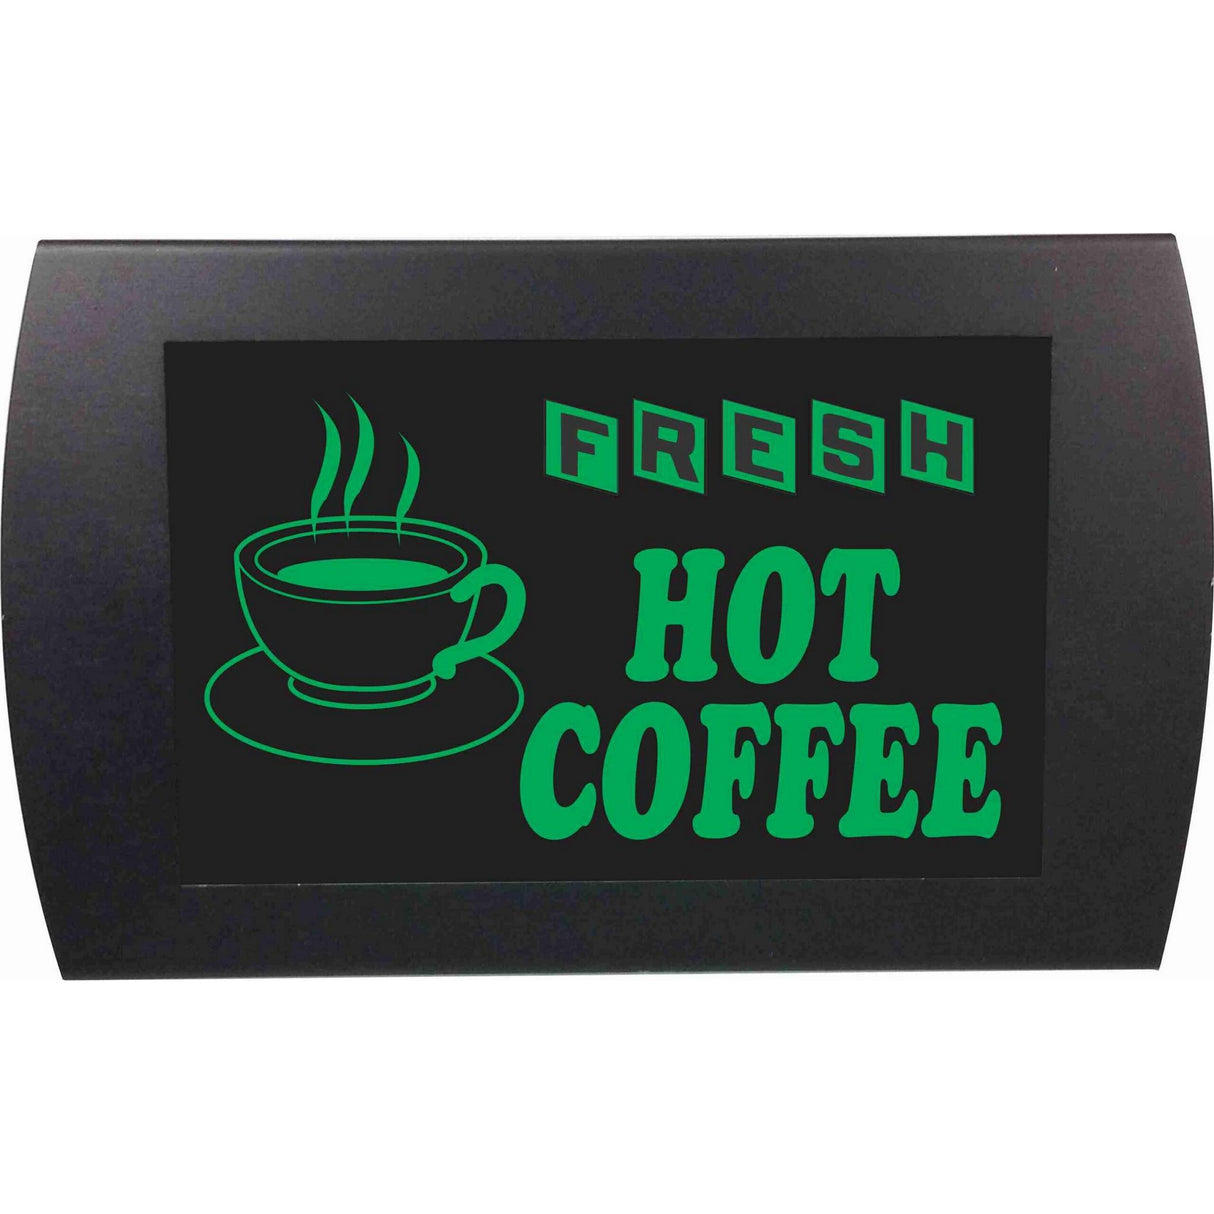 American Recorder OAS-2032M-GR "FRESH HOT COFFEE" LED Lighted Sign, Green